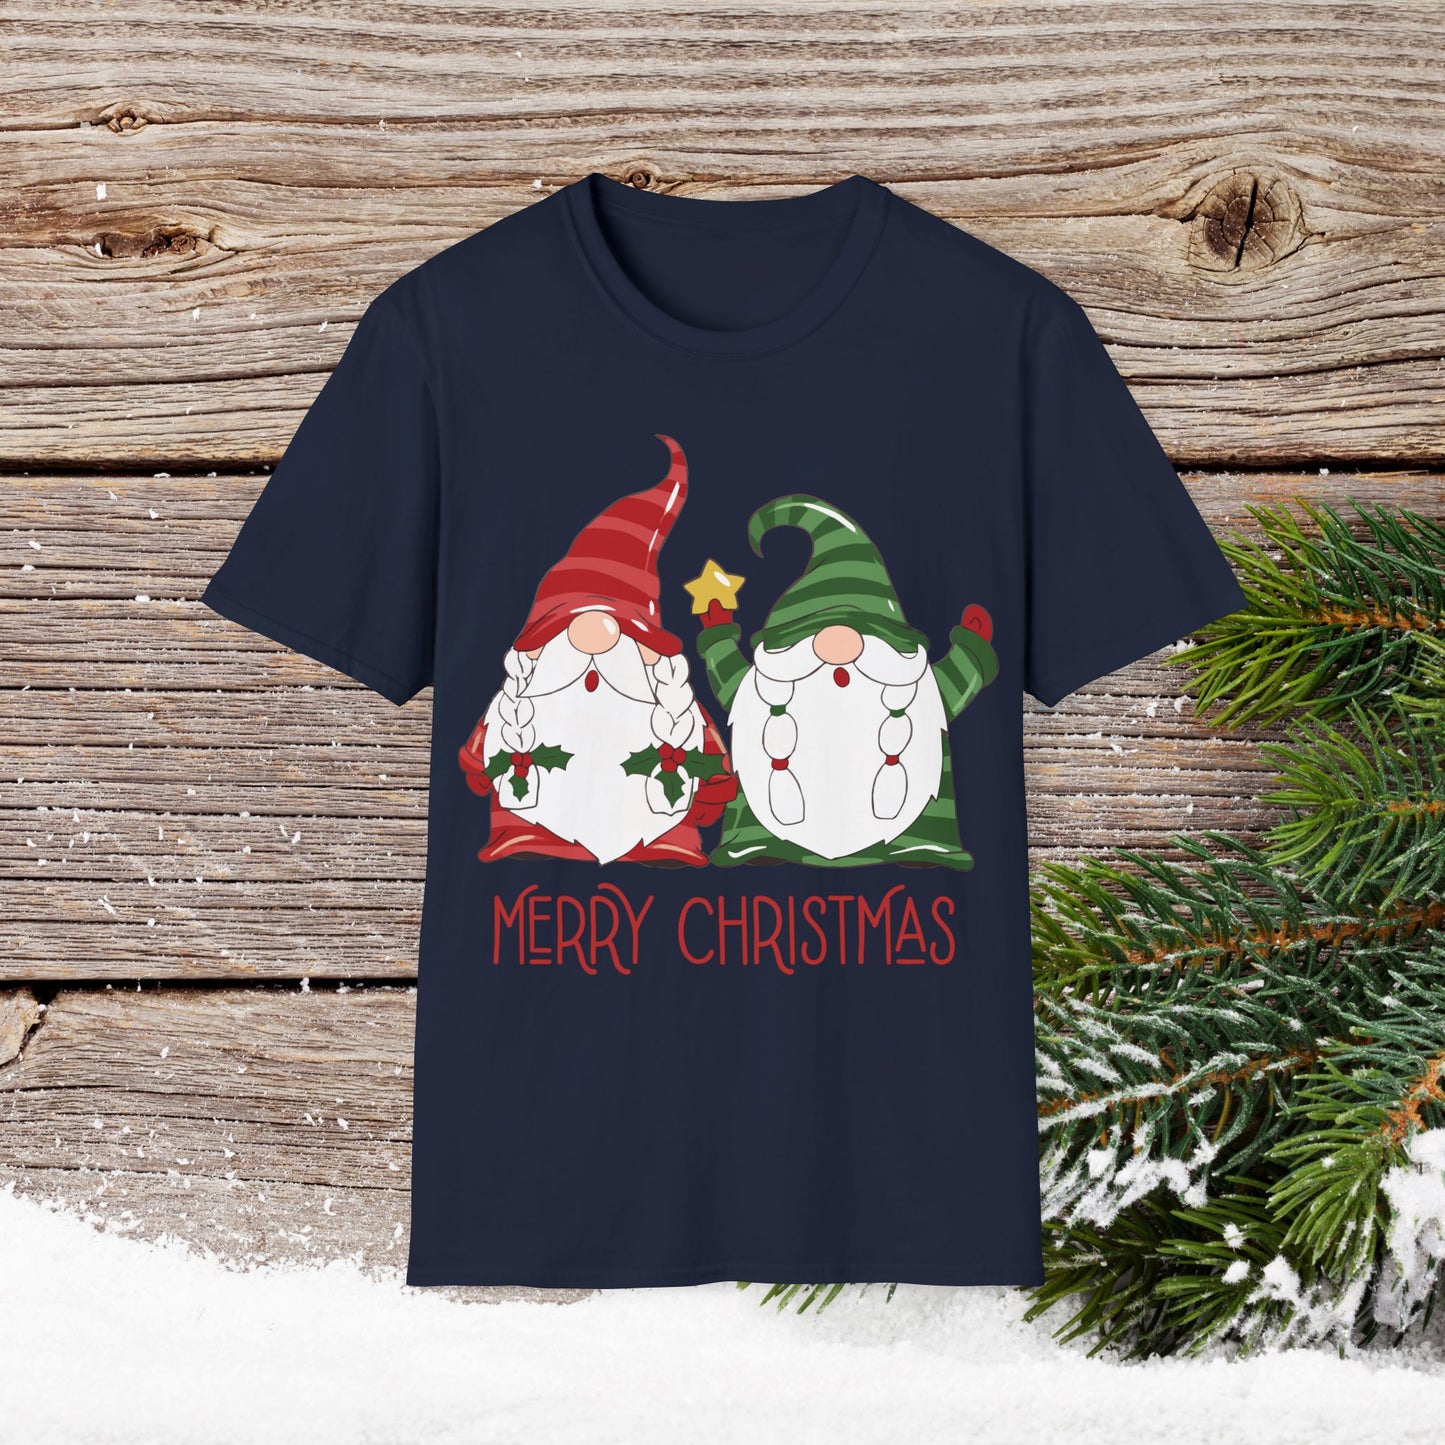 Christmas T-Shirt - Gnome Merry Christmas - Cute Christmas Shirts - Youth and Adult Christmas TShirts T-Shirts Graphic Avenue Navy Adult Small 